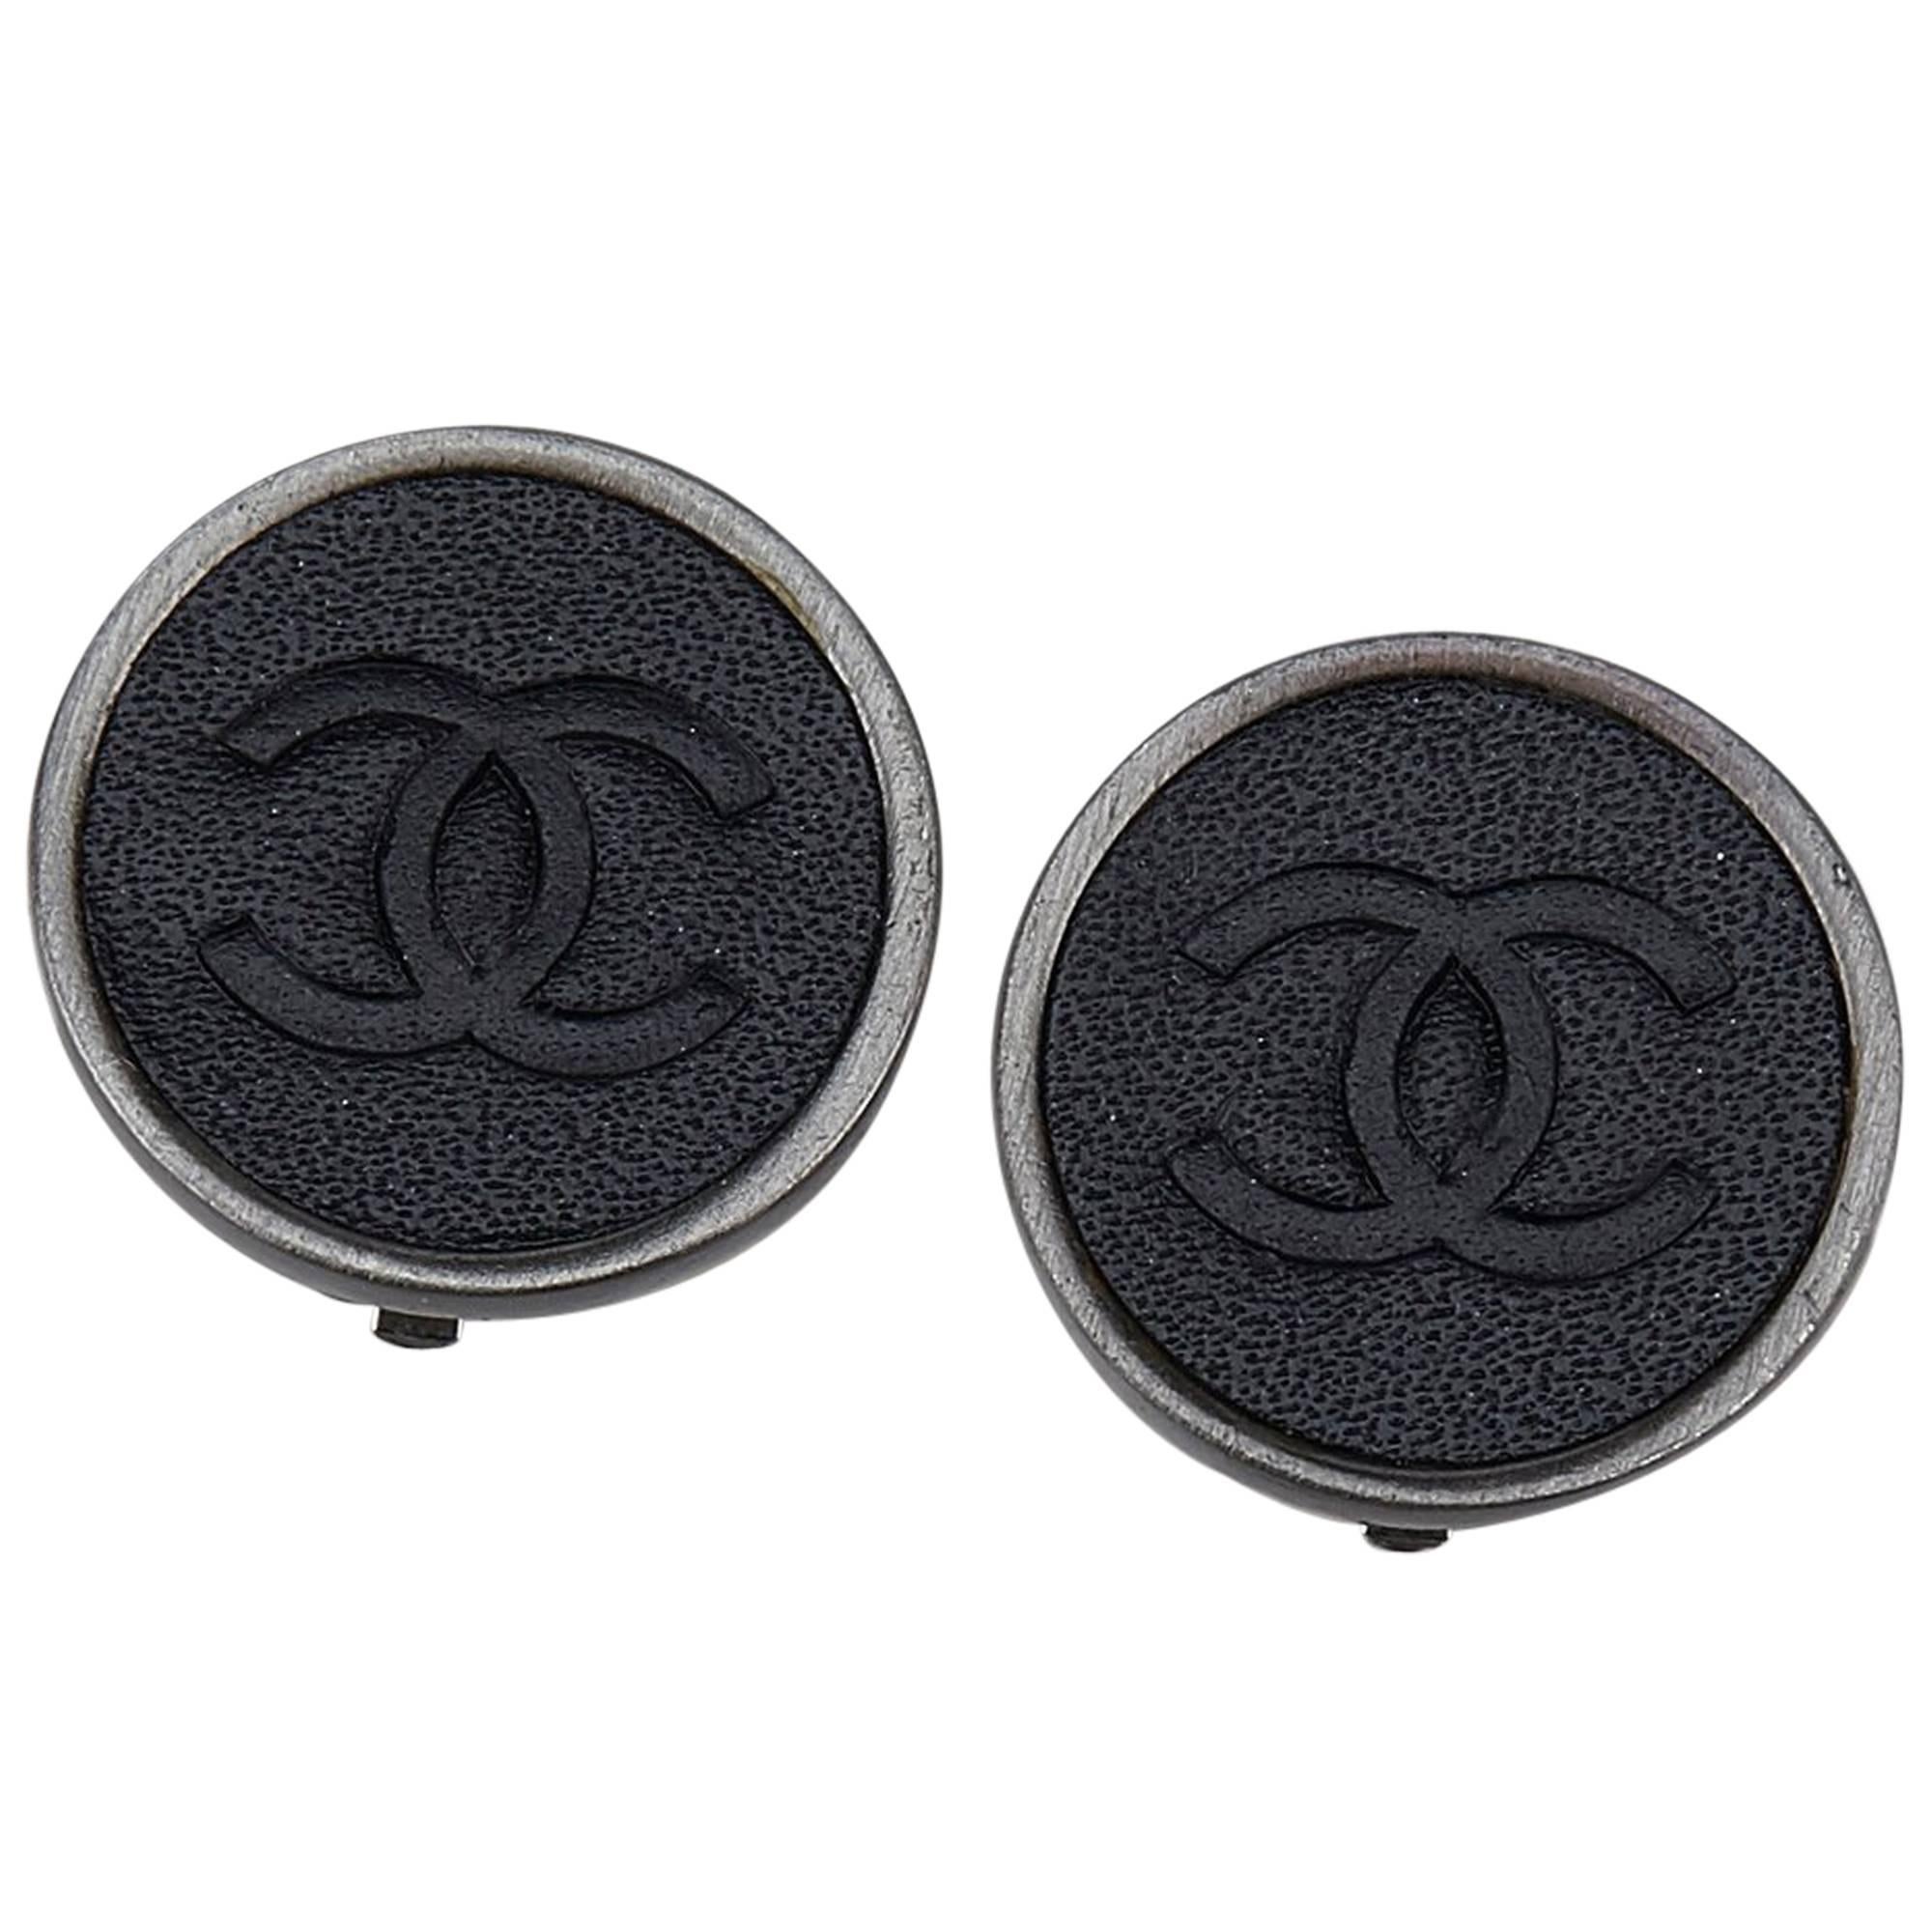 Chanel Black Leather Silver Toned "CC" Logo Clip On Earrings 